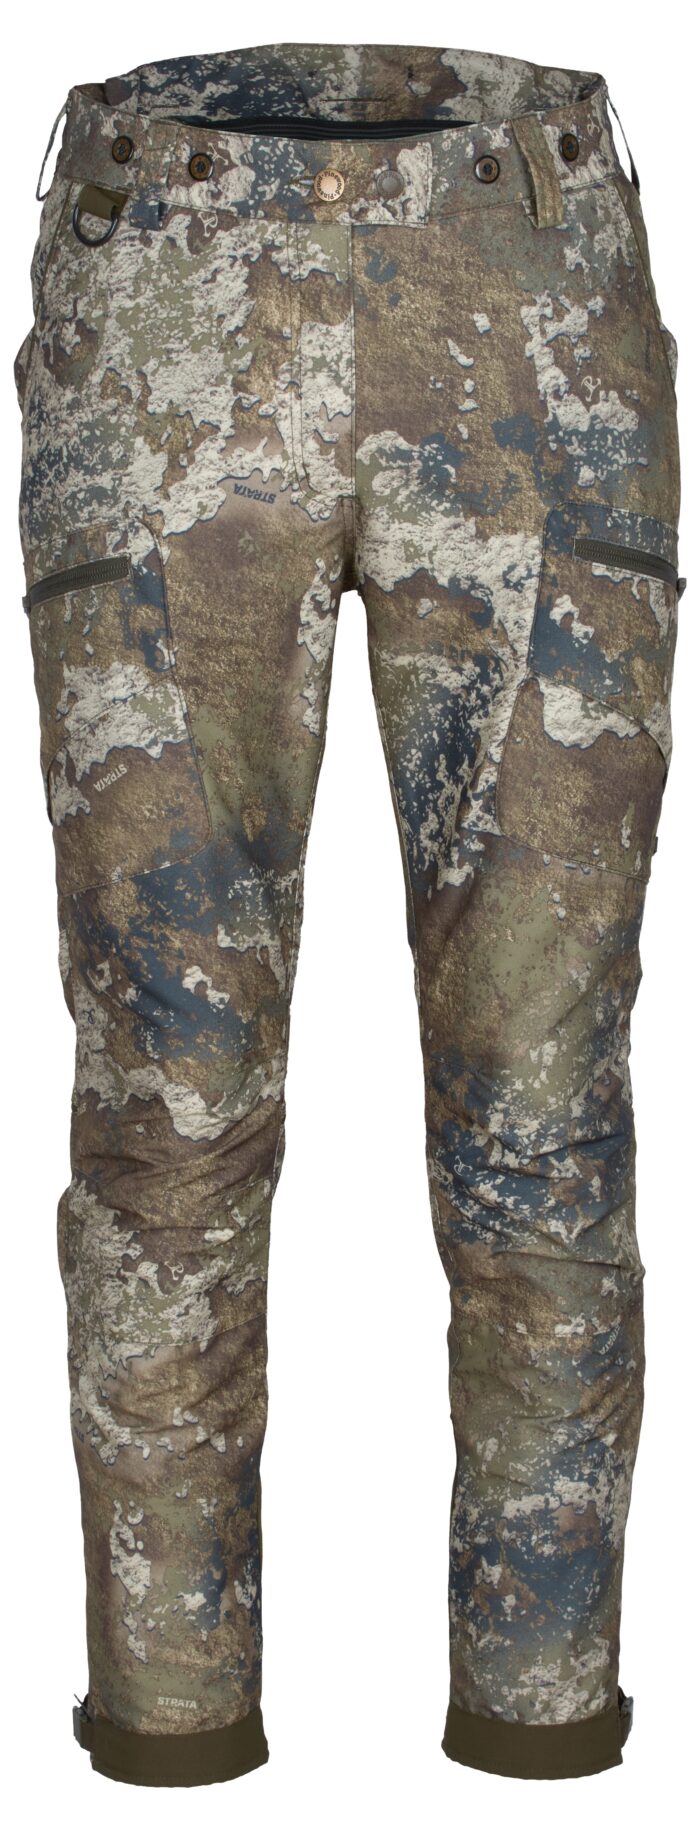 3691 969 01 Pinewood Hunter Pro Xtreme 20 Camou Trousers Womens Strata BLANK 3891 scaled